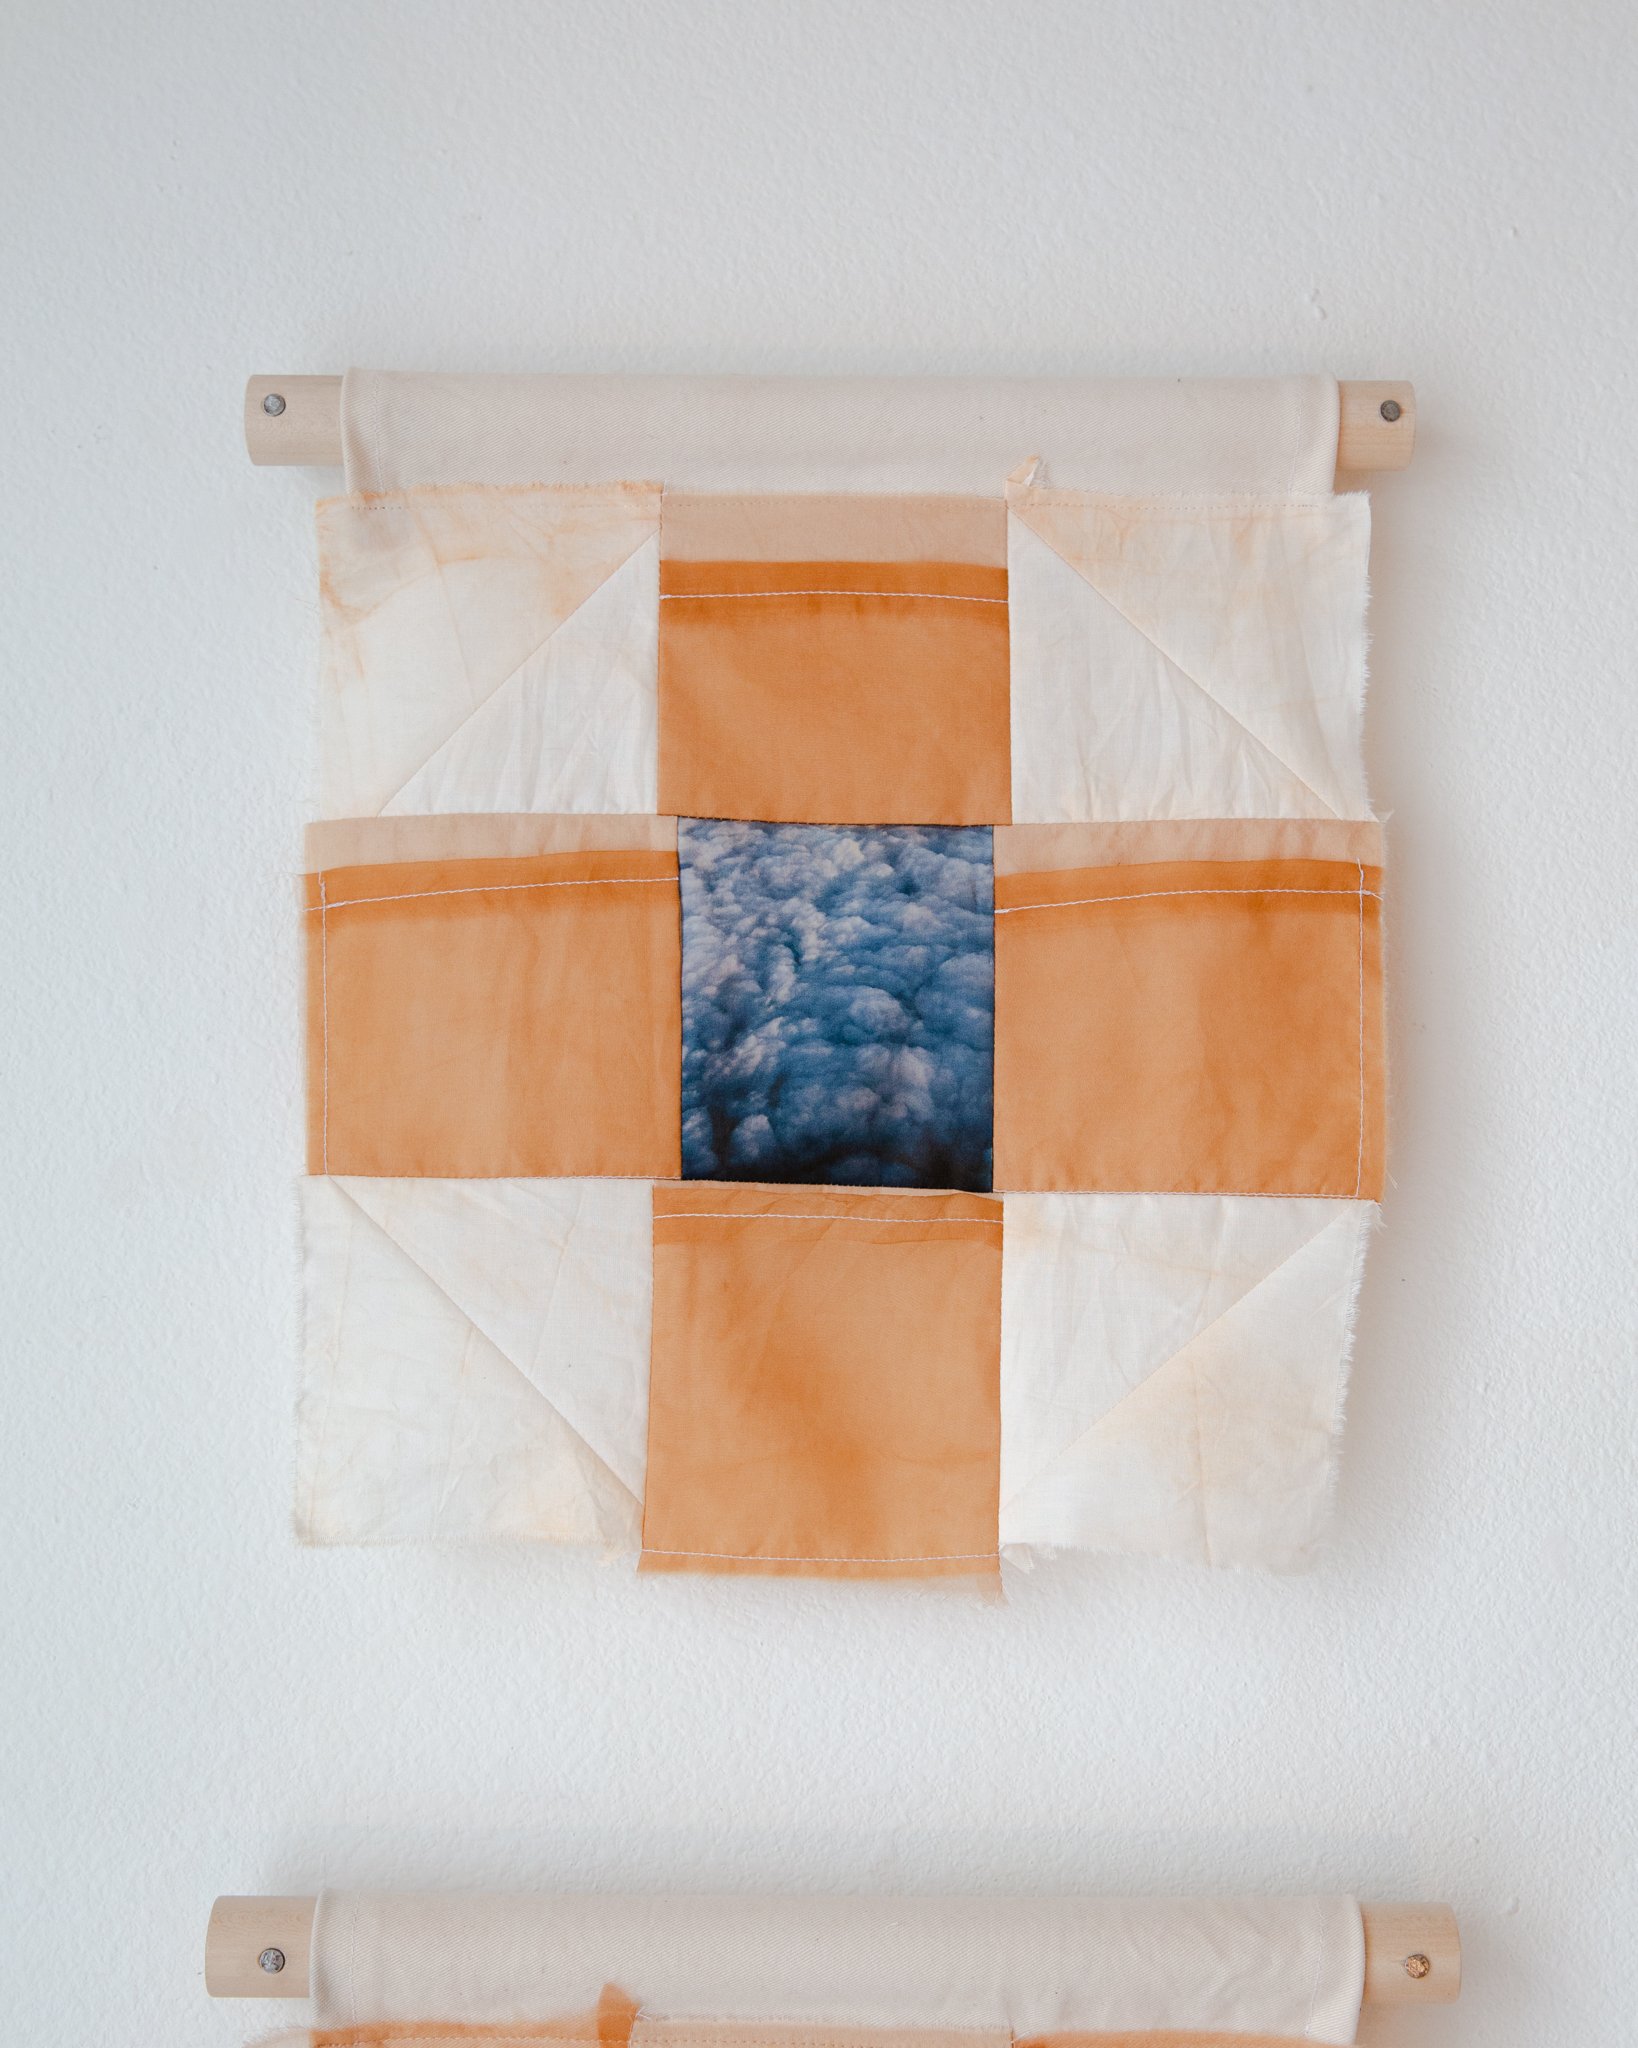   transforming continuance , 2023  recycled cotton bed sheets, silk organza dyed with locally foraged loquat leaves, and California clay, photo printed on silk charmeuse 